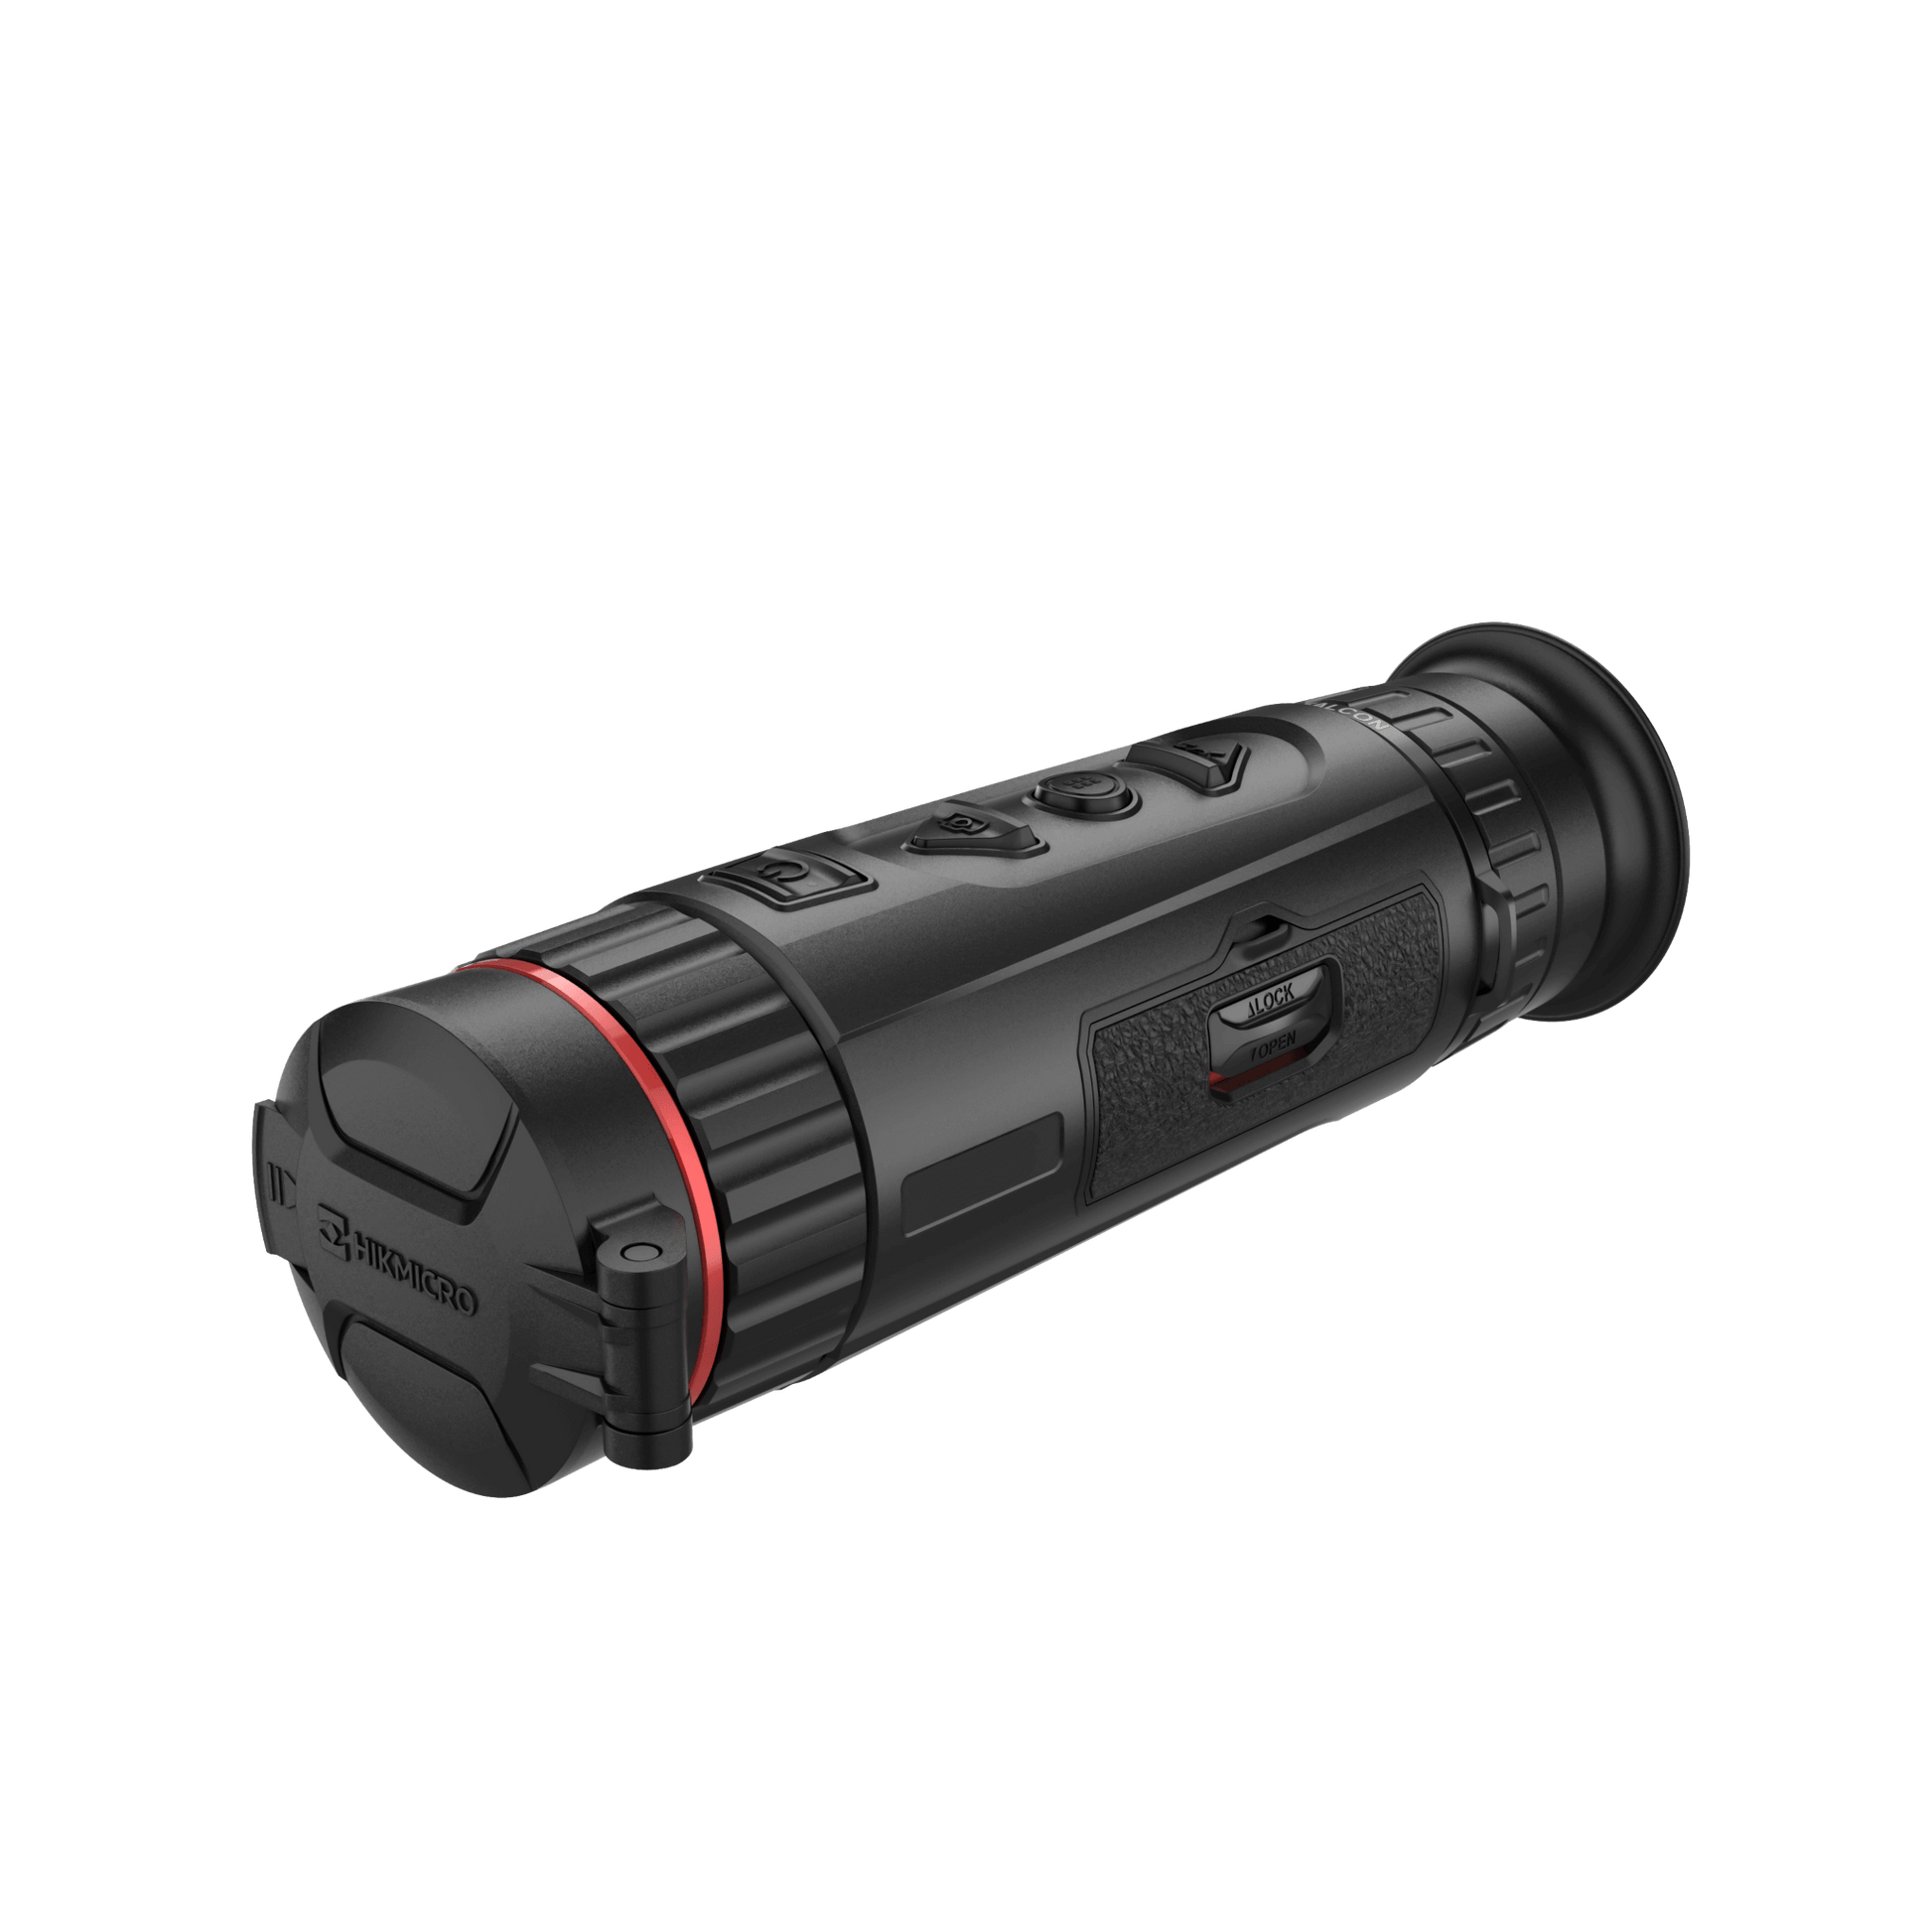 HikMicro Thermal Imaging Monocular for Sale - HikMicro Falcon Series FQ35 - HM-TS46-35XG_W-FQ35 - Front Left View